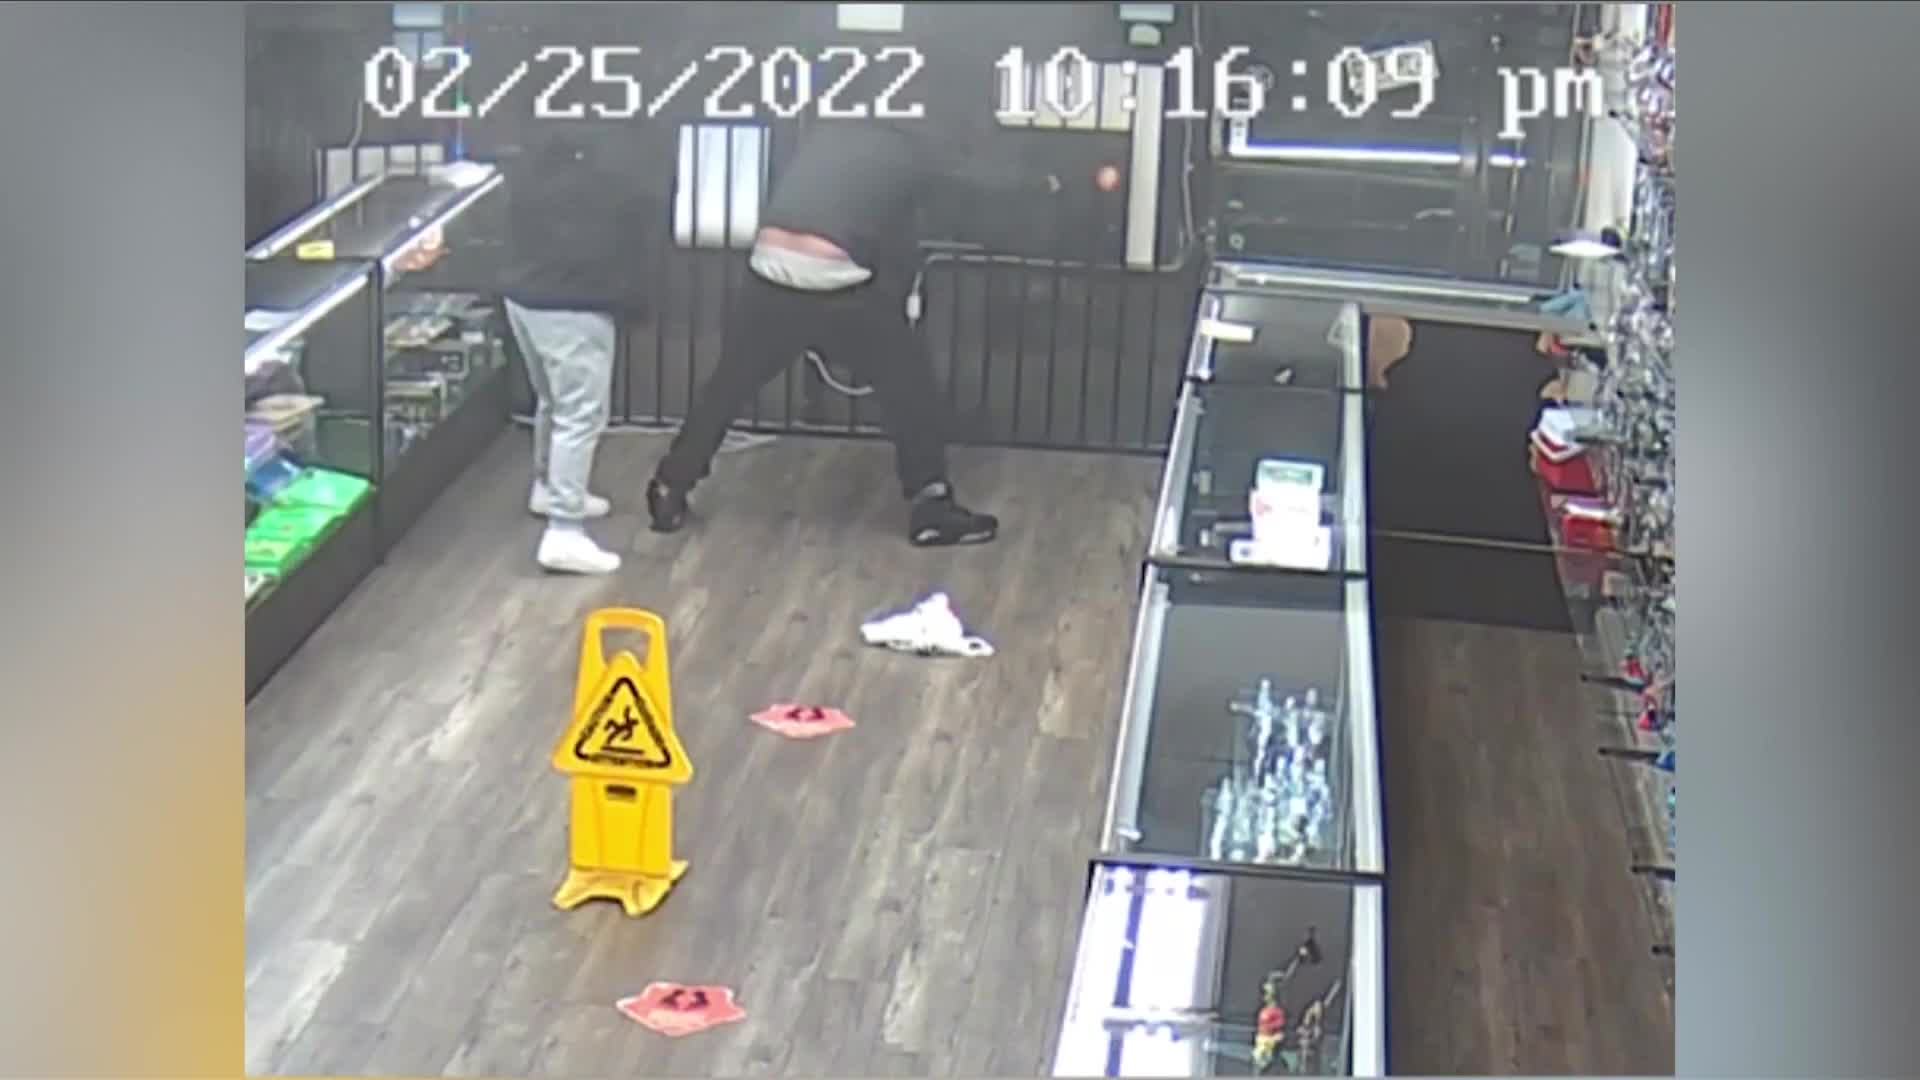 Video: Armed suspects try to shoot their way out during a smoke shop robbery  in Fresno